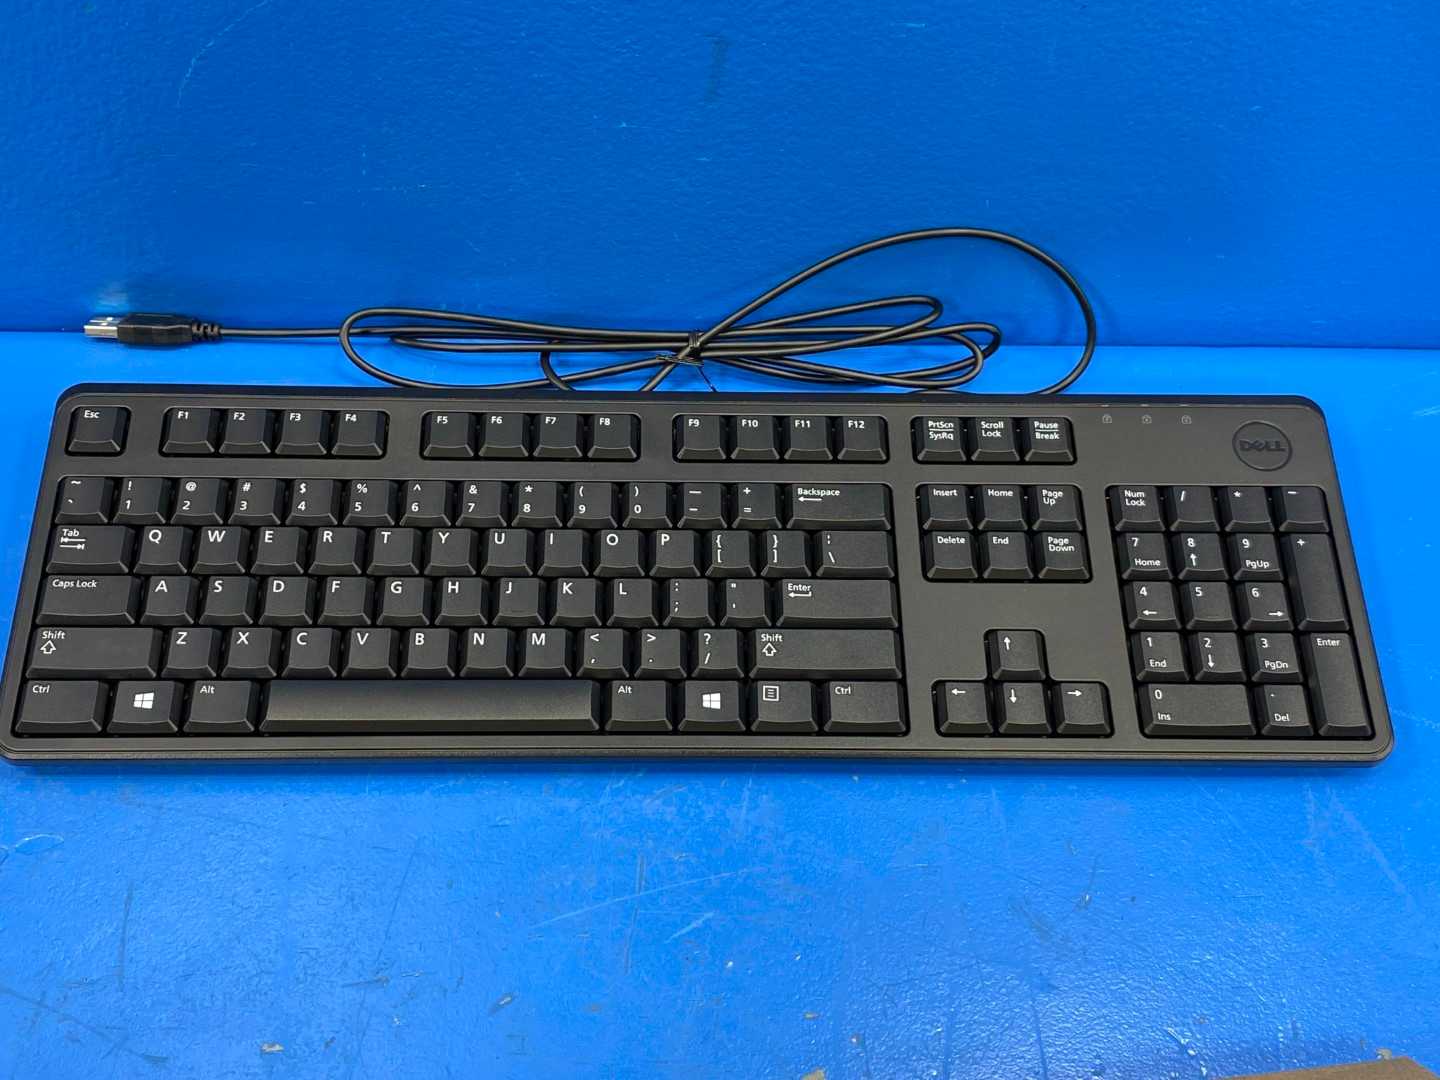 WYSE Z Class Cloud Client Complete Model Zx0 (Keyboard & Mouse, And Accessories)